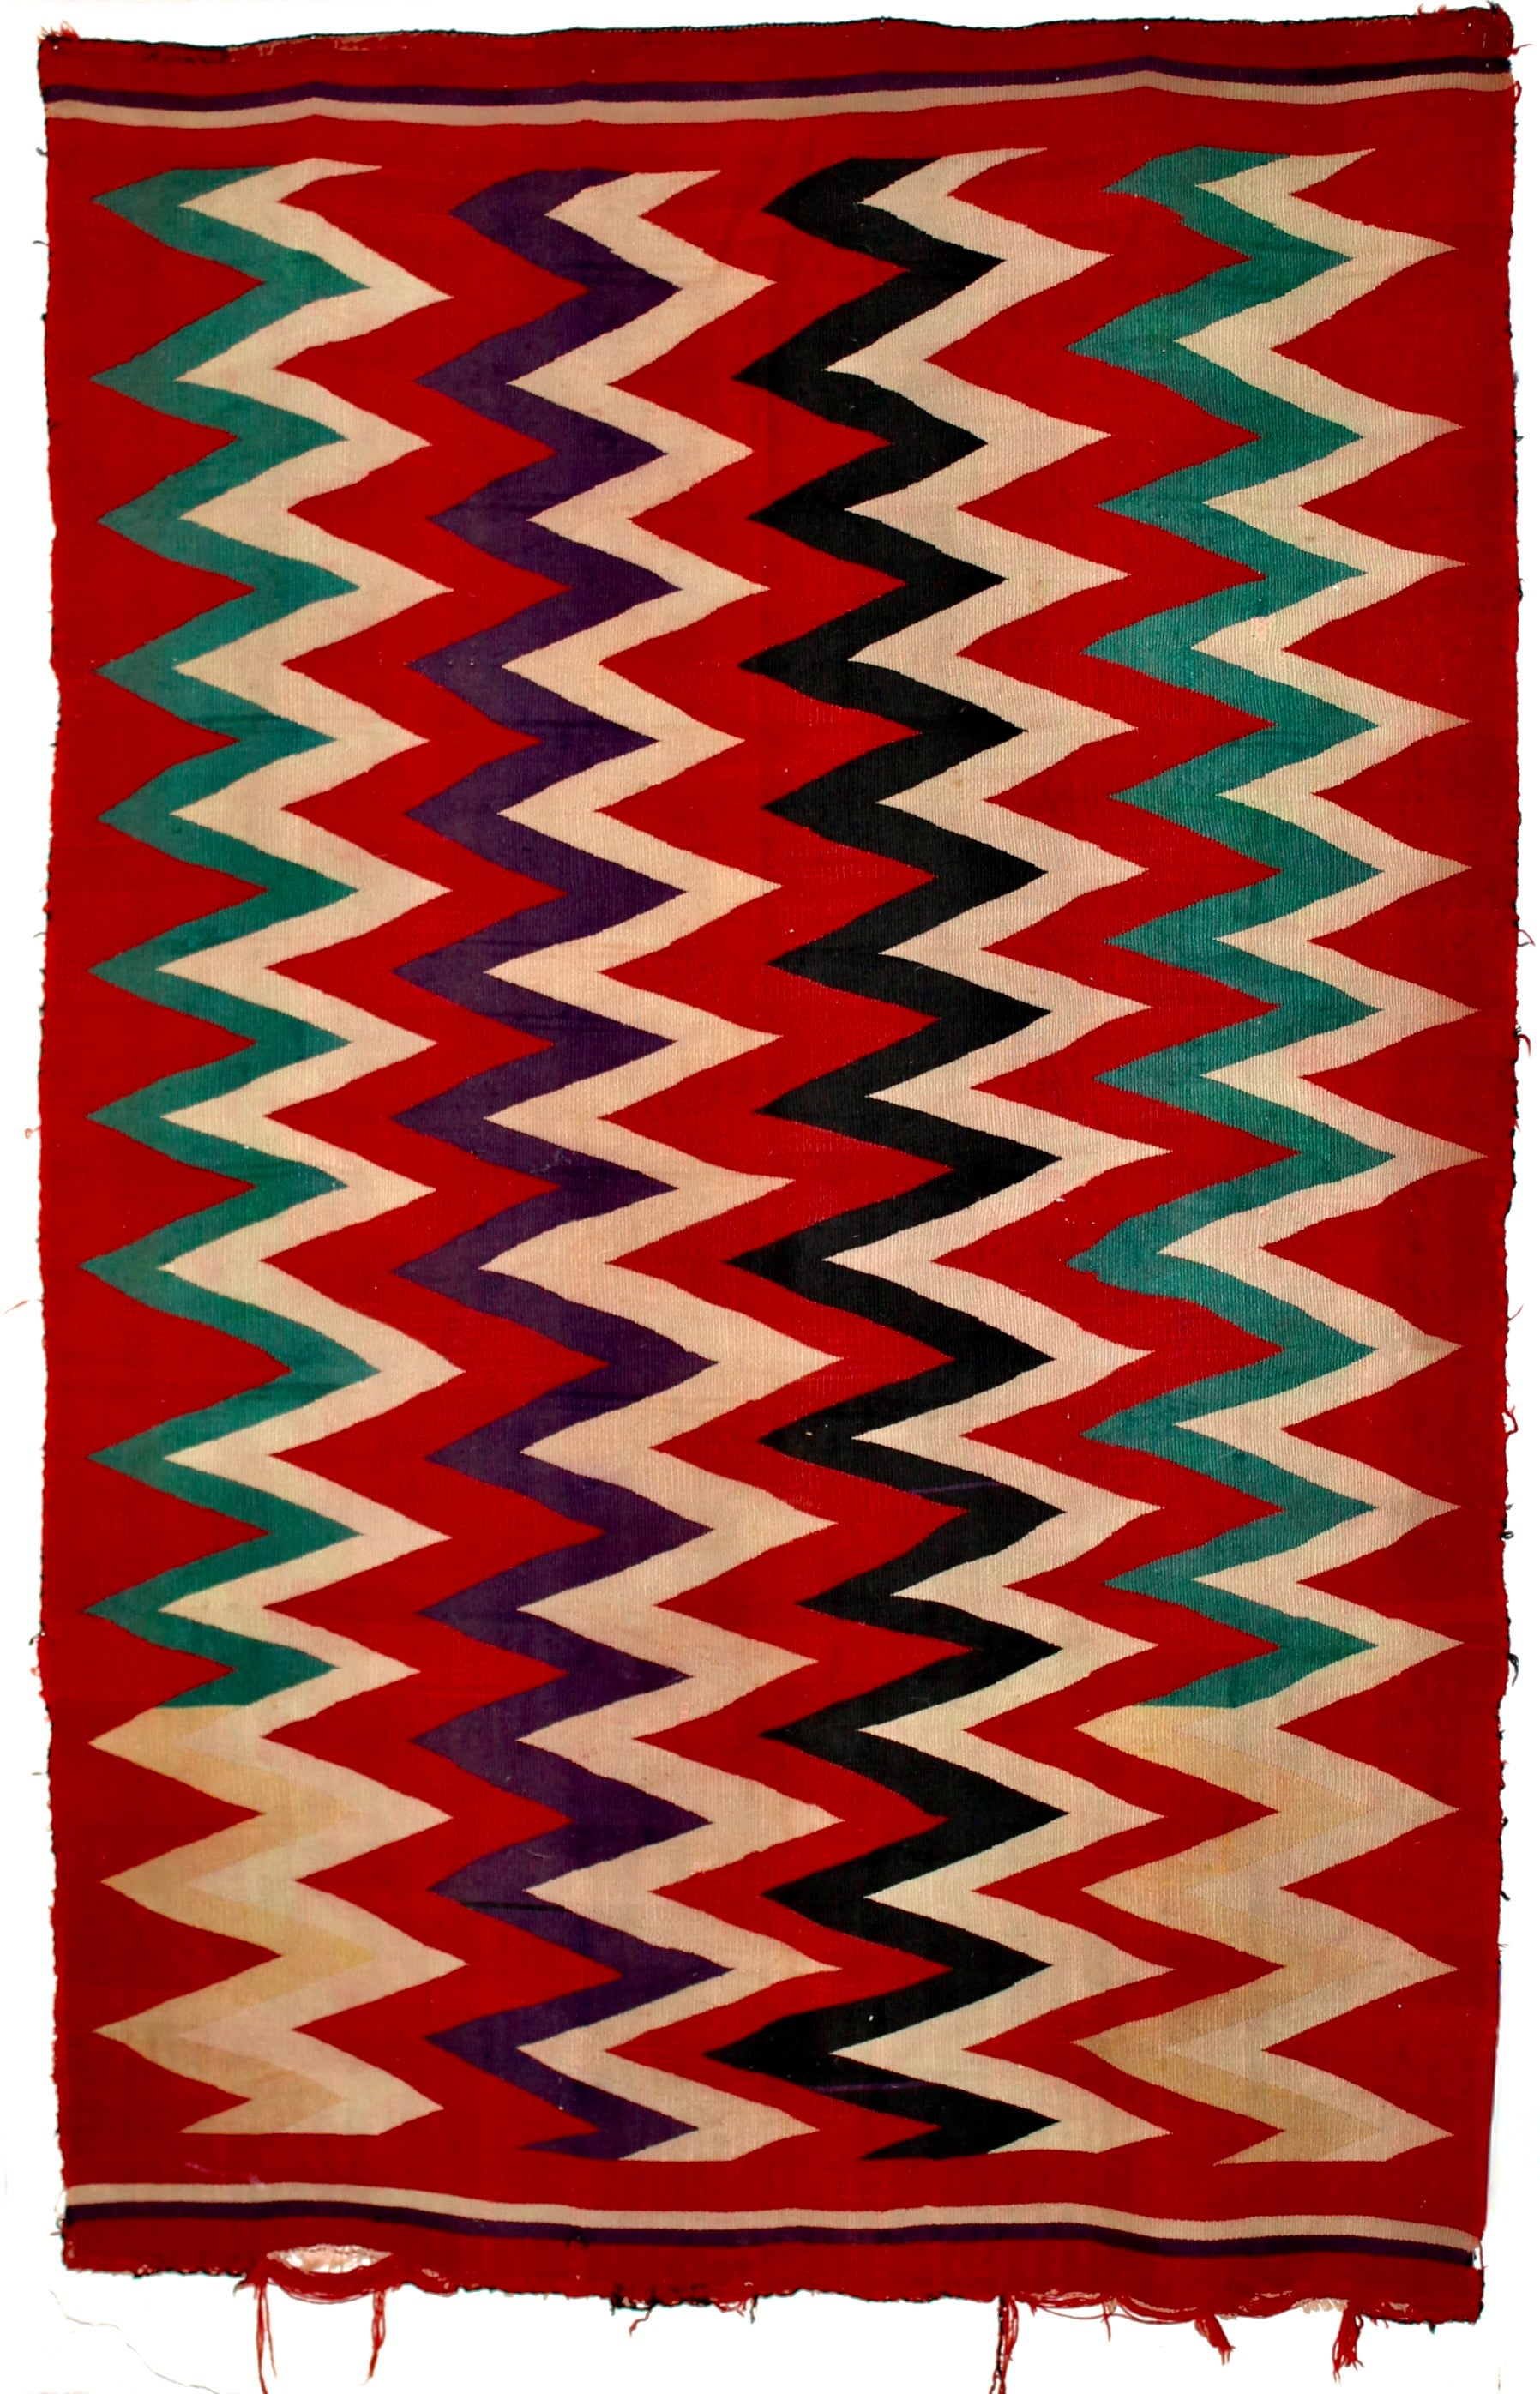 A Germantown (late 19th century) consisting of vertical zig-zag narrow lines in green, white violet and black, on a dark red ground. 72x48